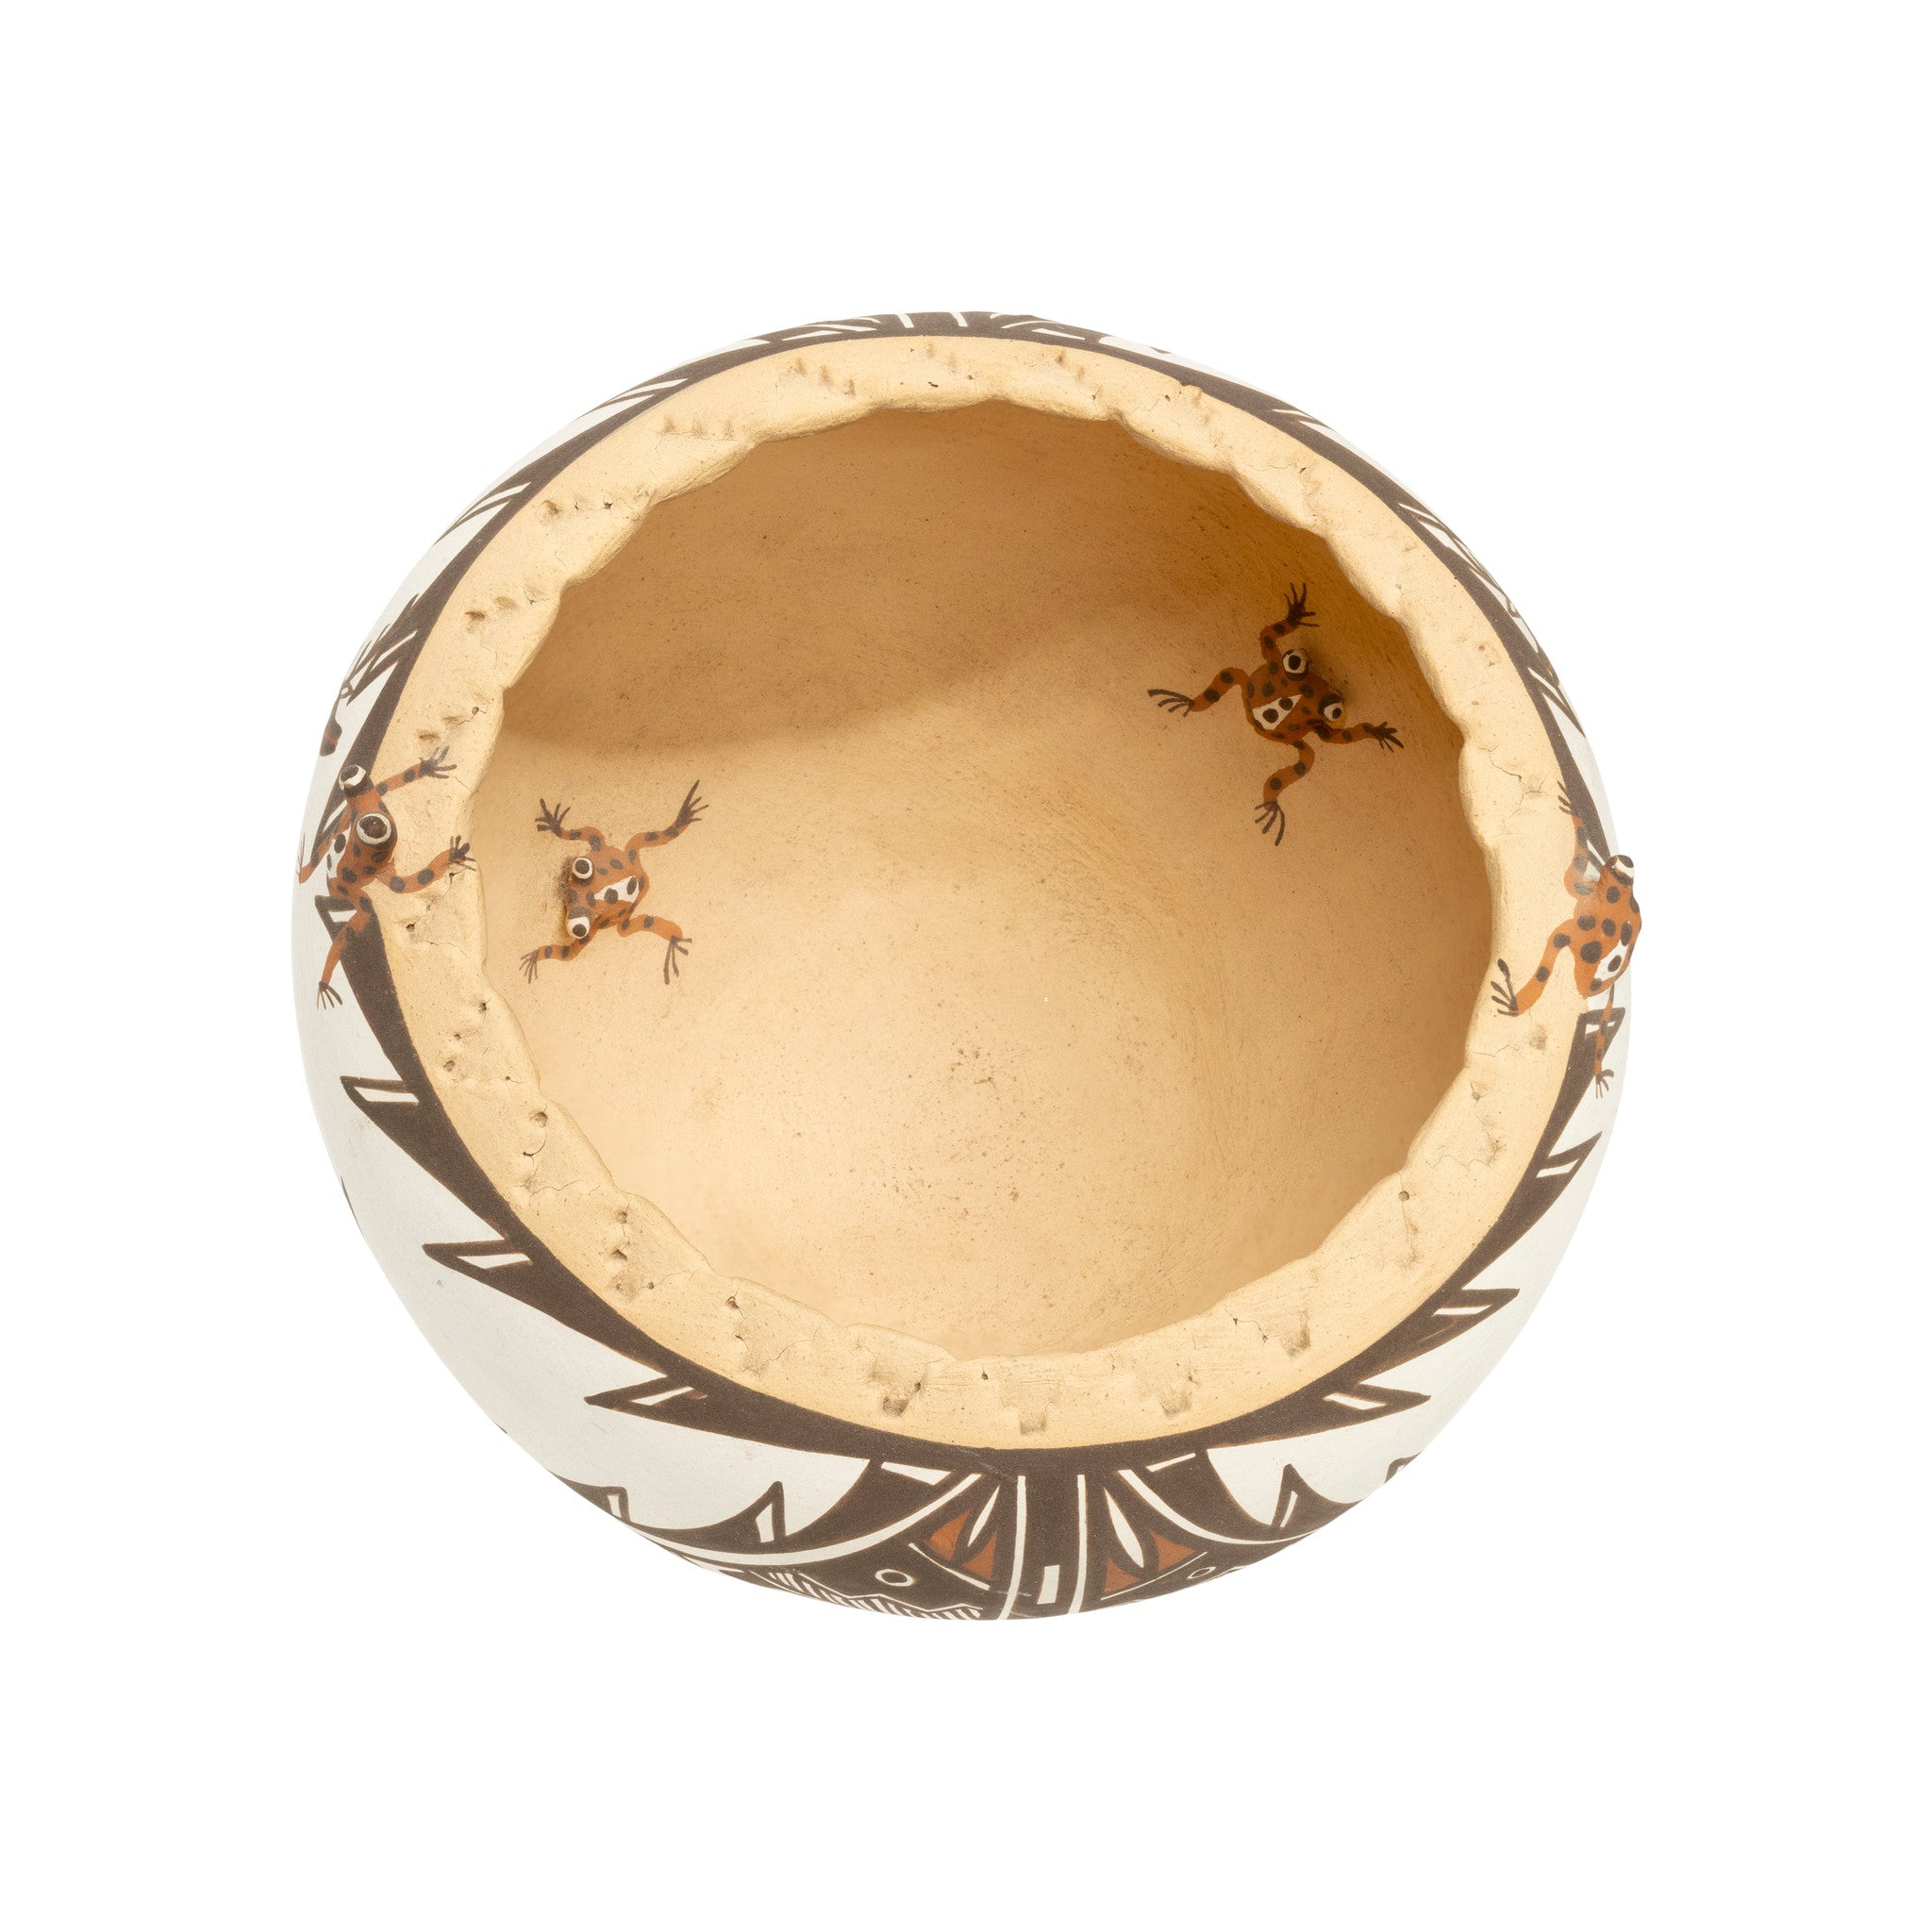 Zuni bowl with Deer and Frogs